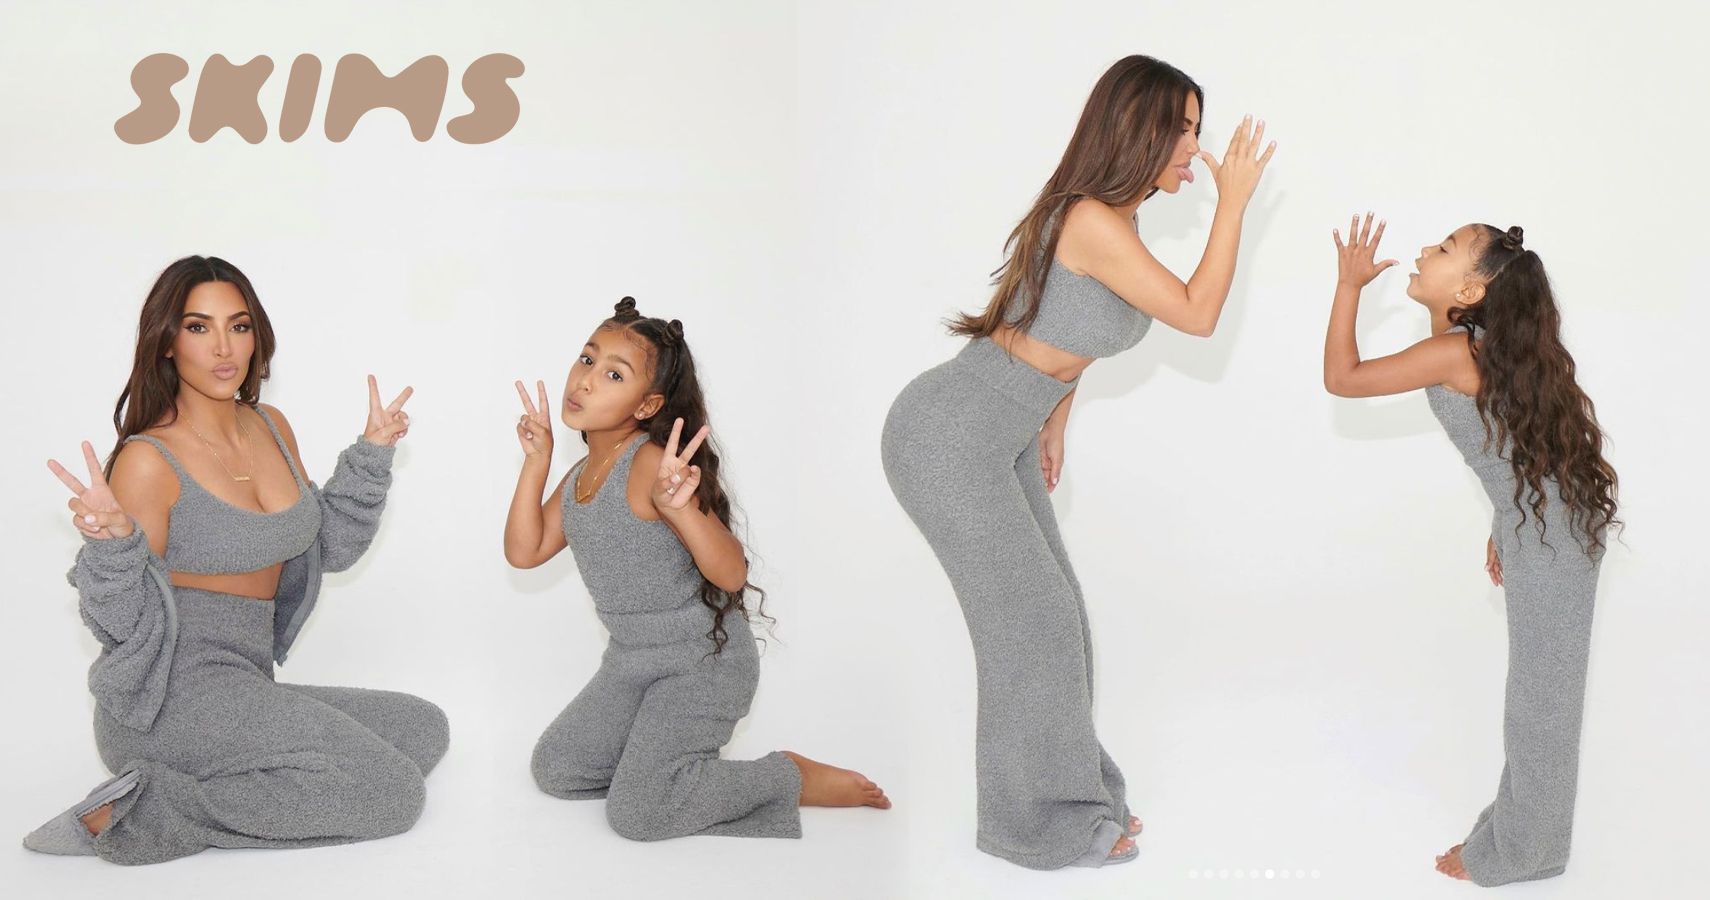 Kim Kardashian Is Launching A SKIMS Line For Children & She Has The Cutest Models